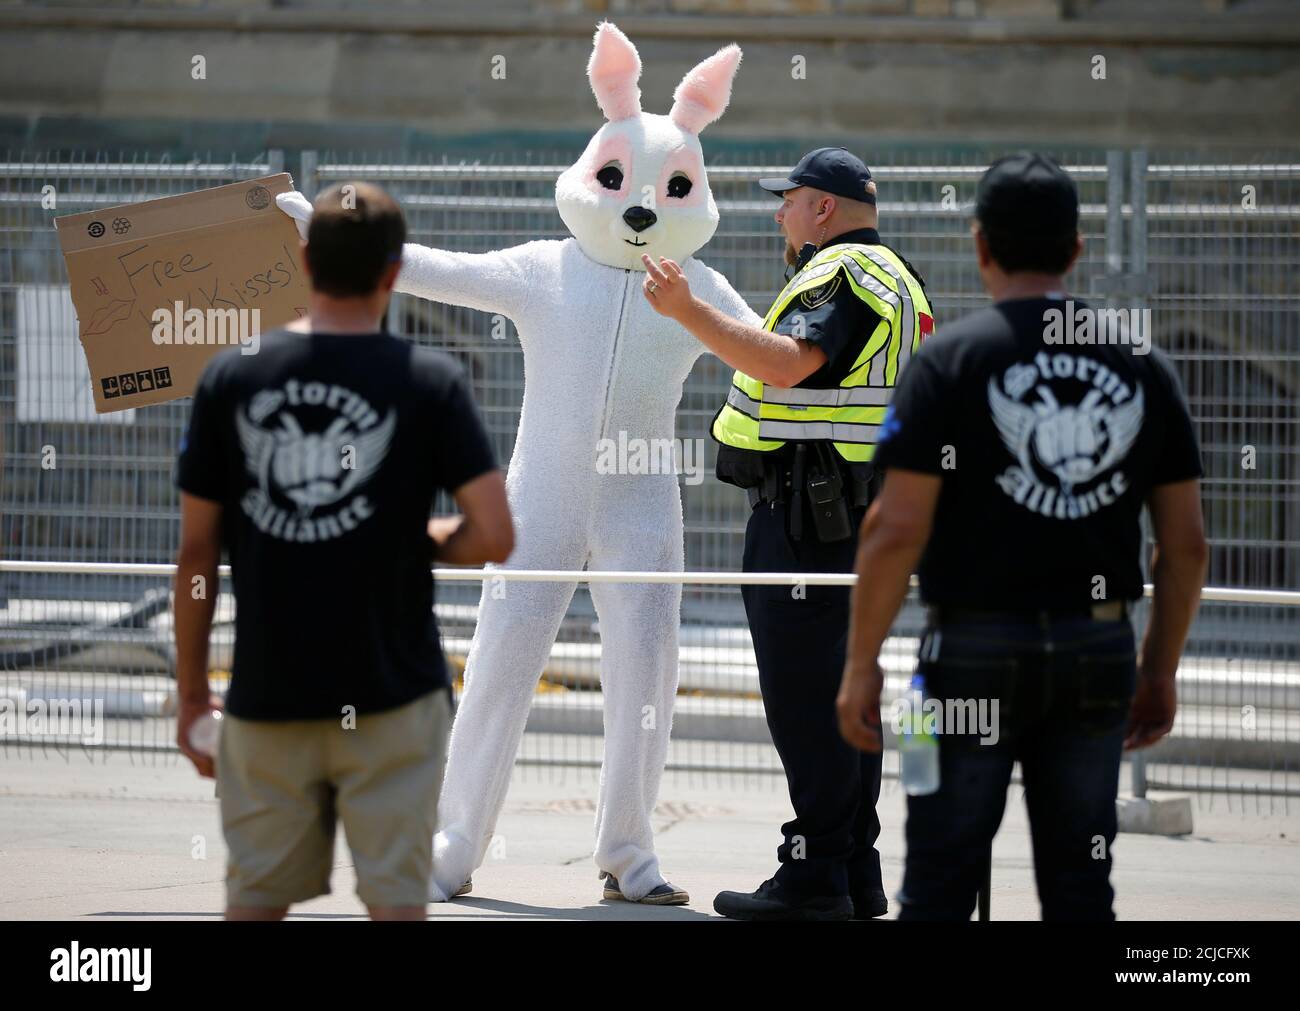 Protesters from the far-right group Storm Alliance look on as a counter-protester in a bunny costume gestures towards them during the 'Canadians for Canada' rally on Parliament Hill in Ottawa, Ontario, Canada, July 14, 2018. REUTERS/Chris Wattie Stock Photo